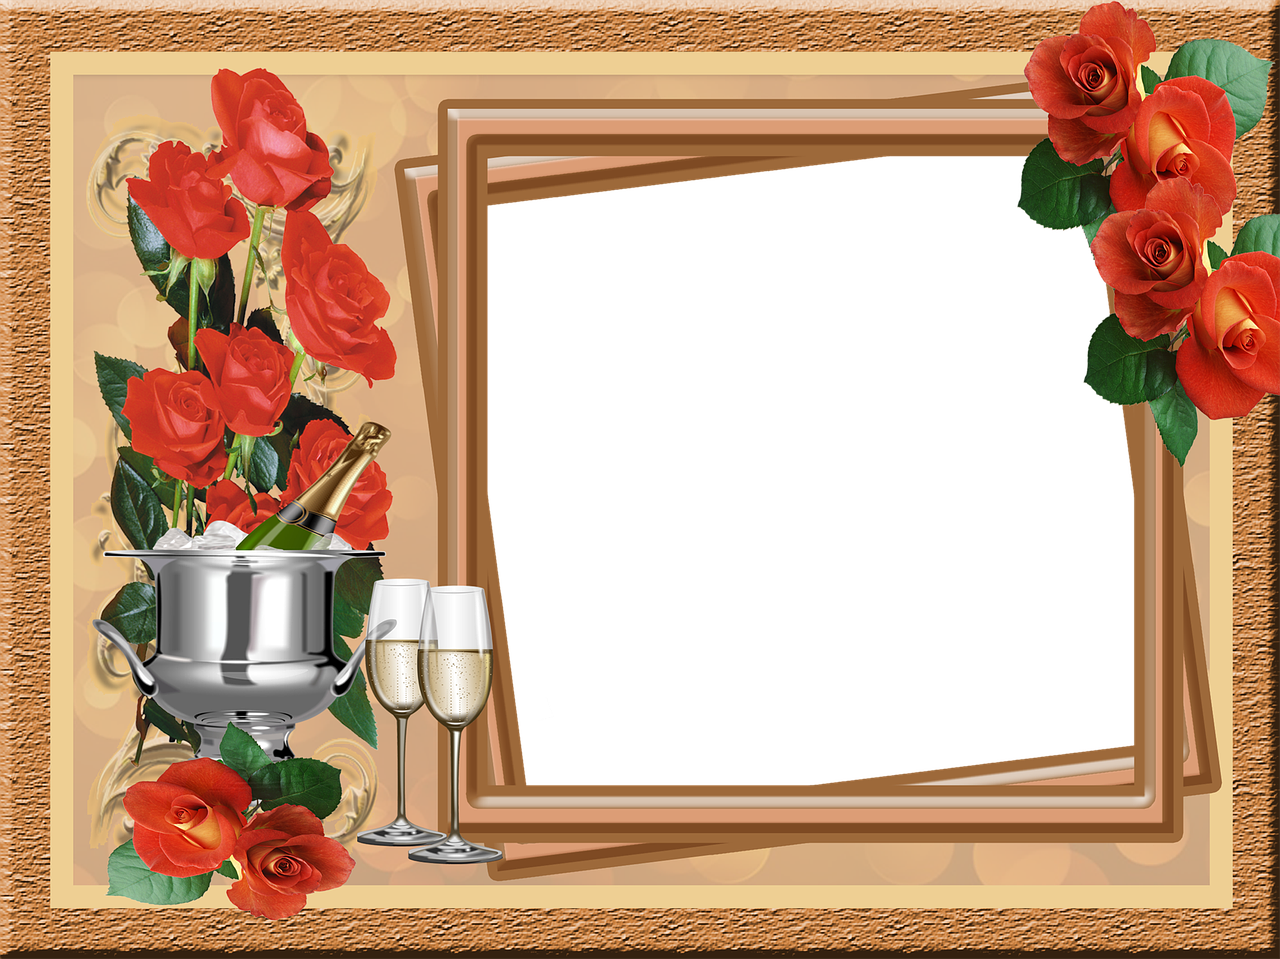 women's holiday photo frame march 8 free photo